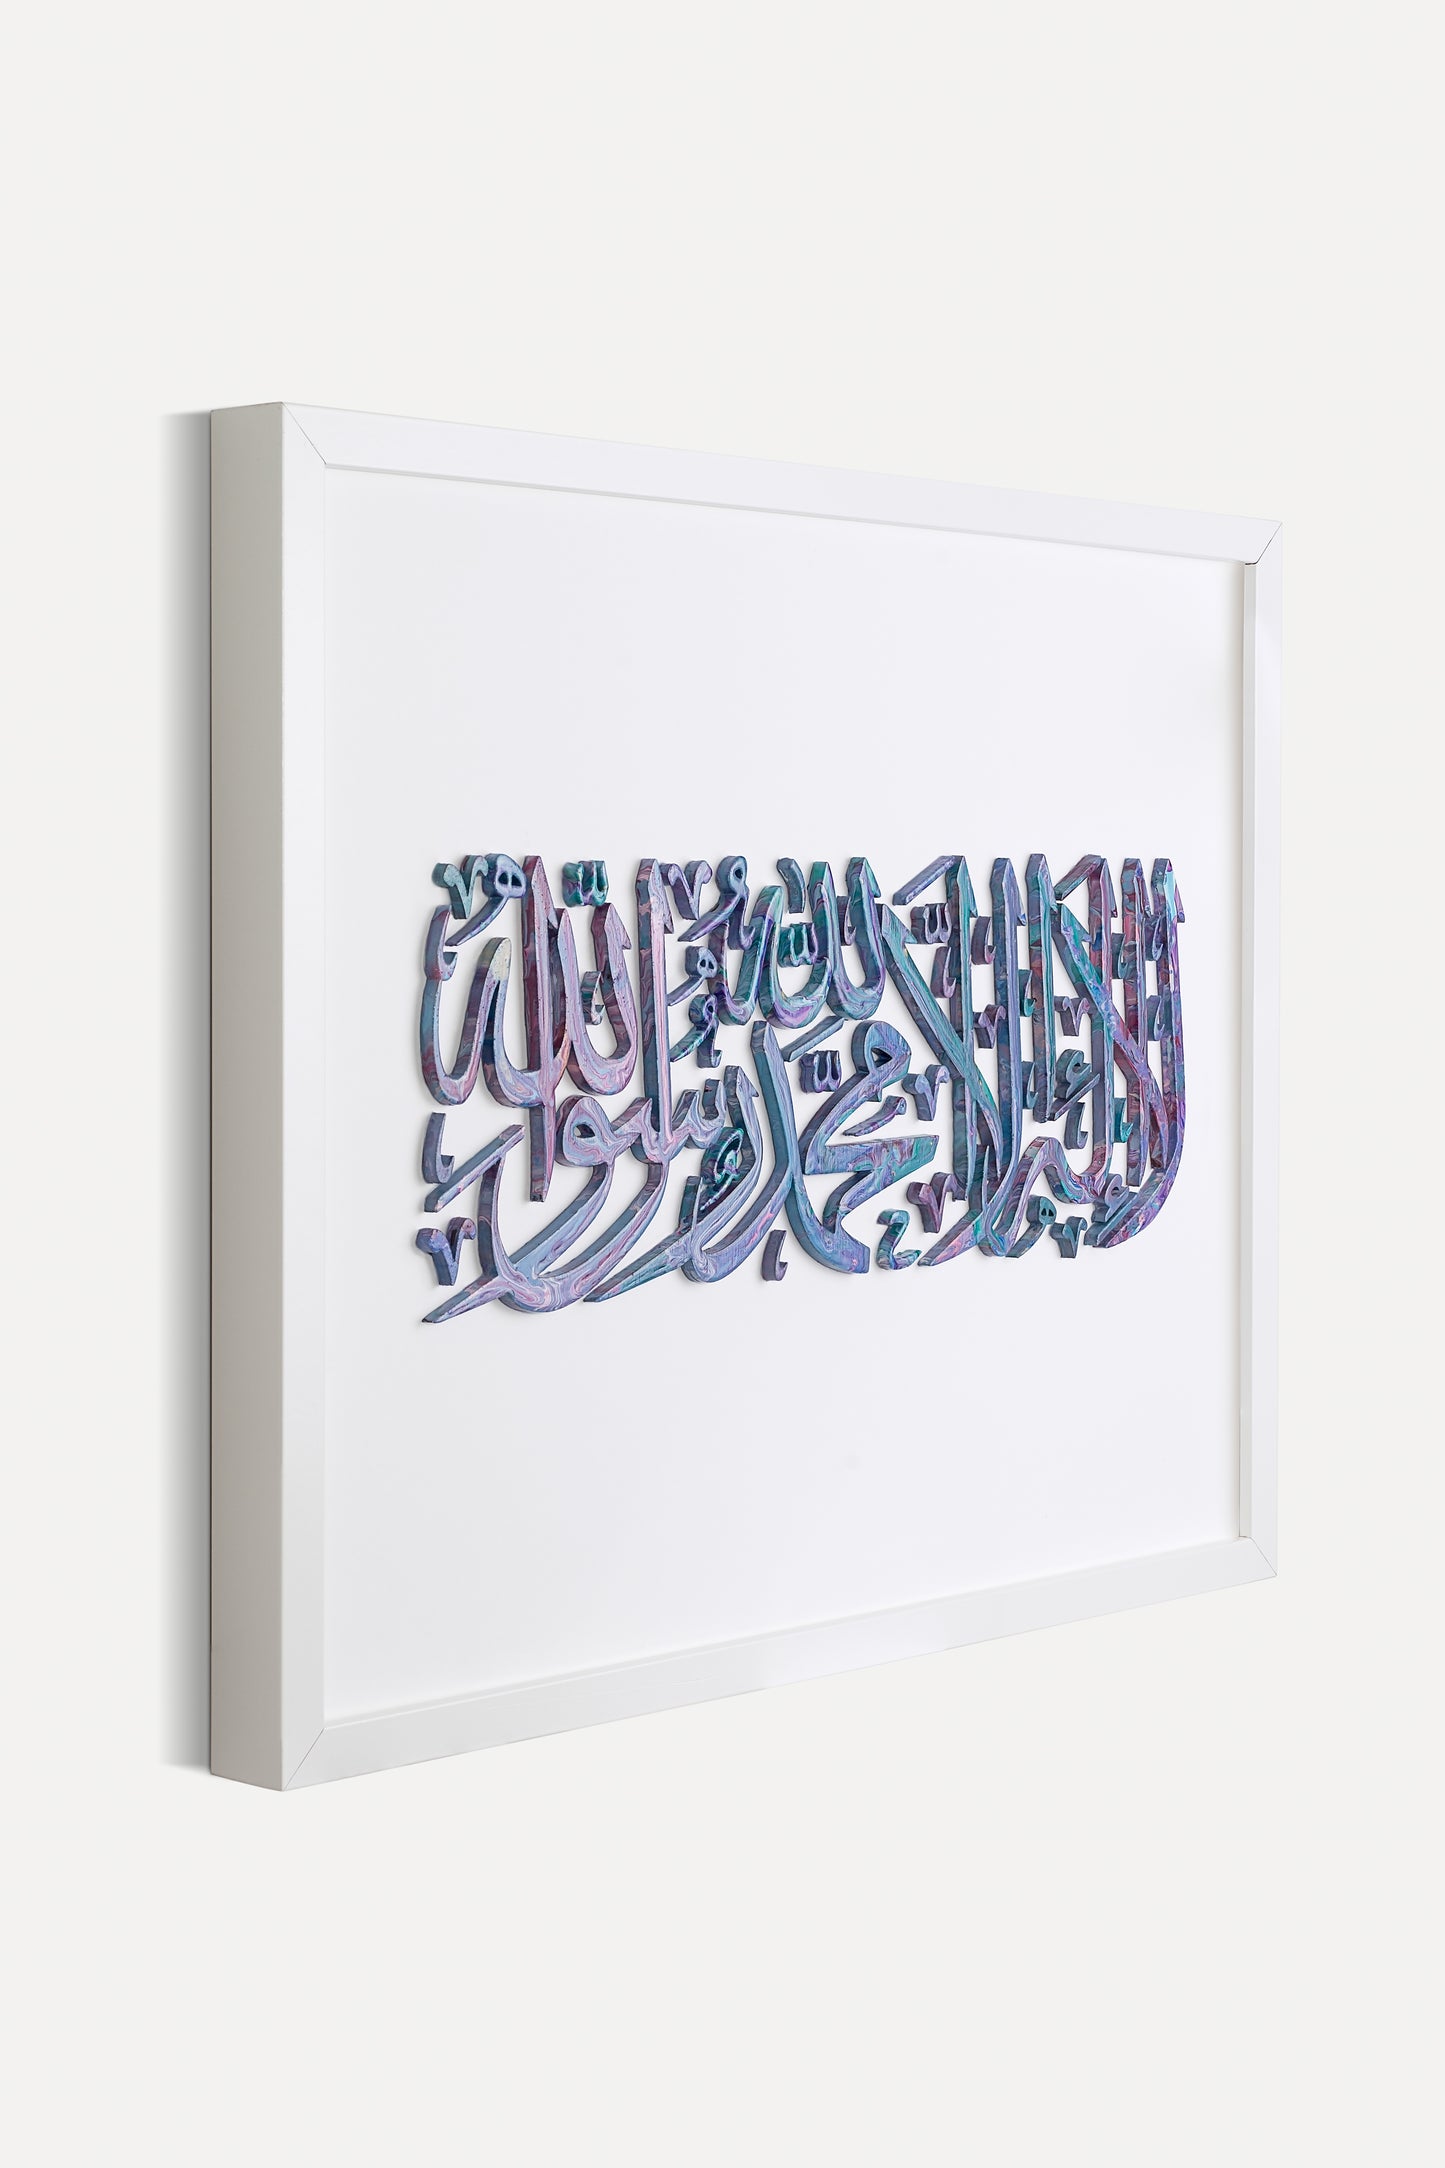 DEVOTION - WOODEN CALLIGRAPHY PAINTING - 16"X20"